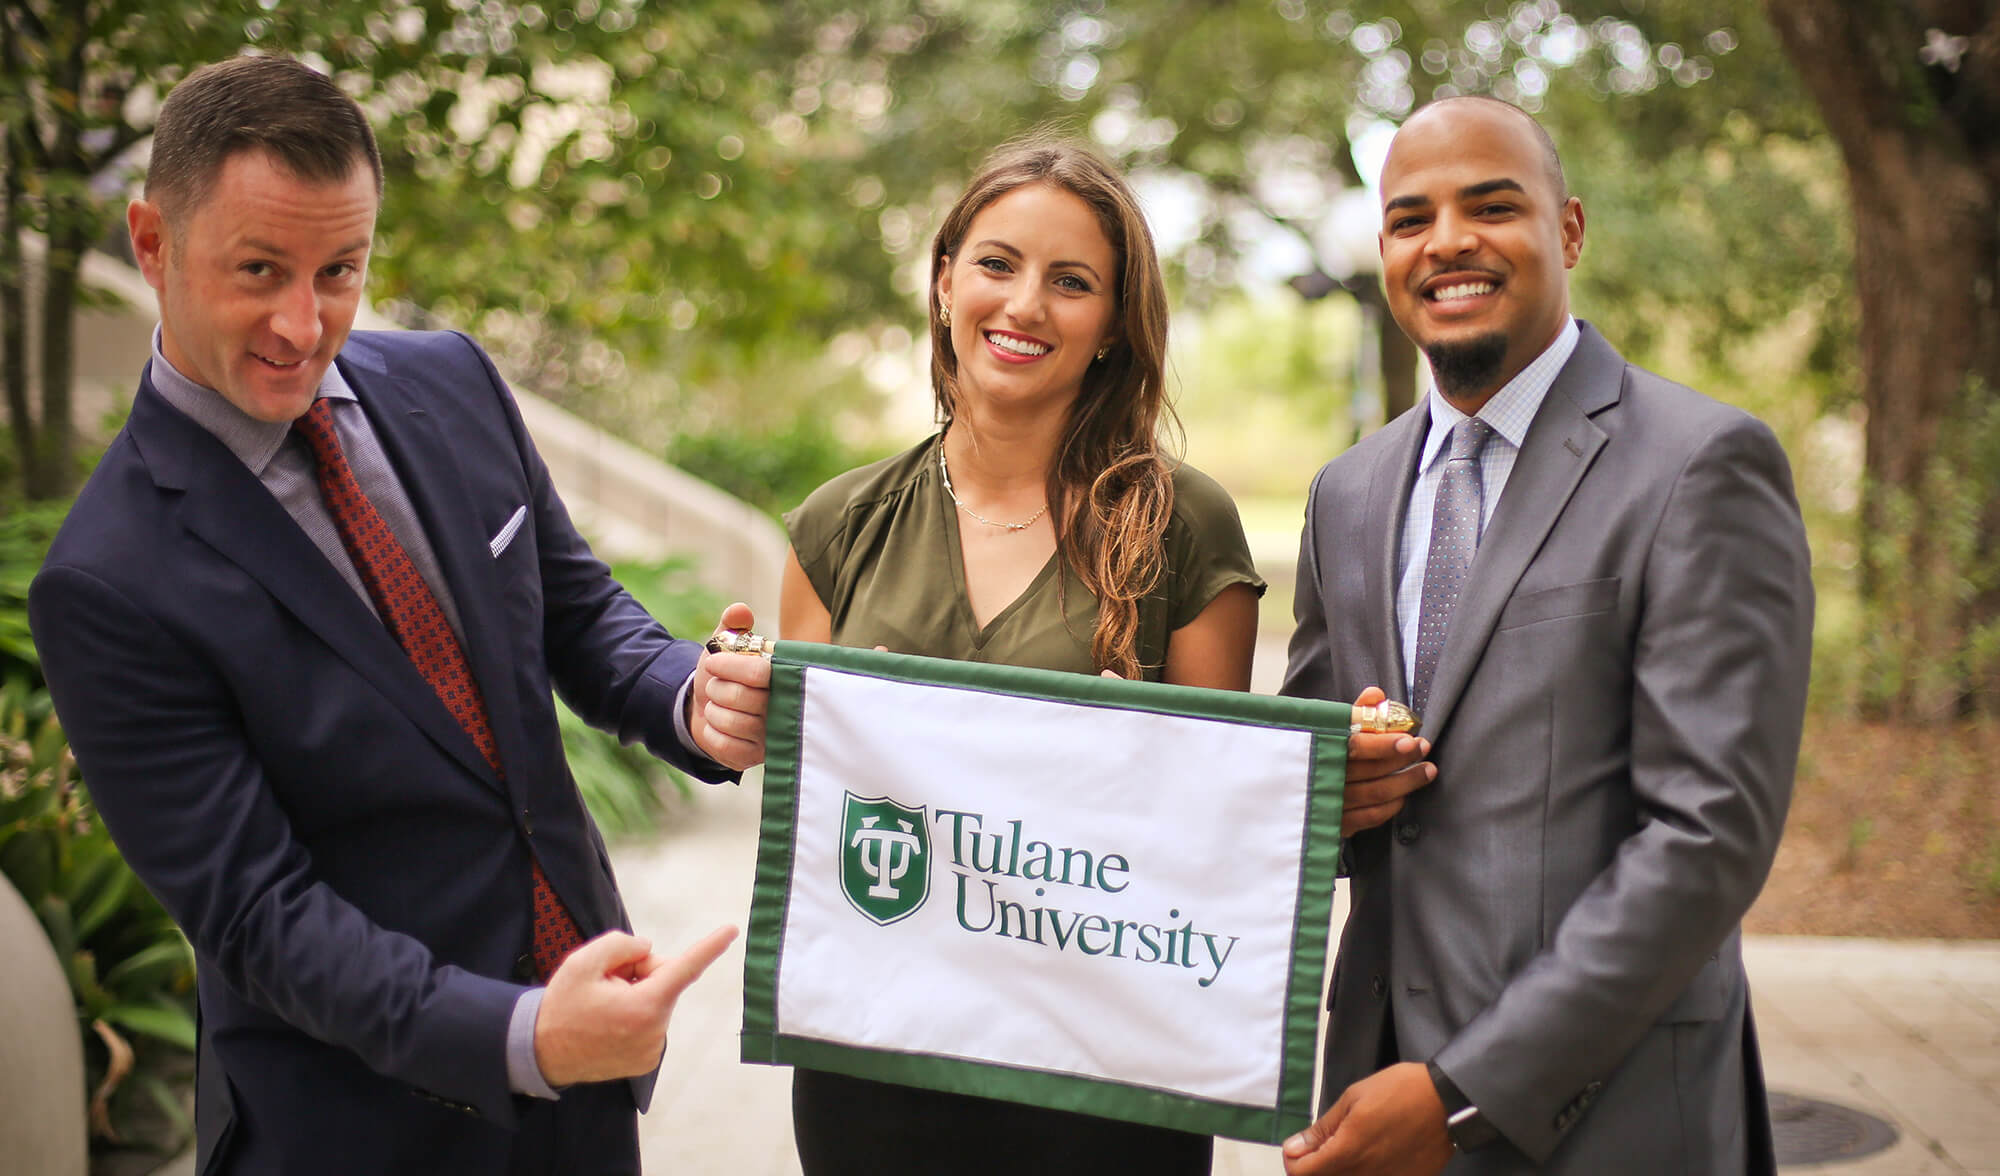 group of 3 people with tulane flag